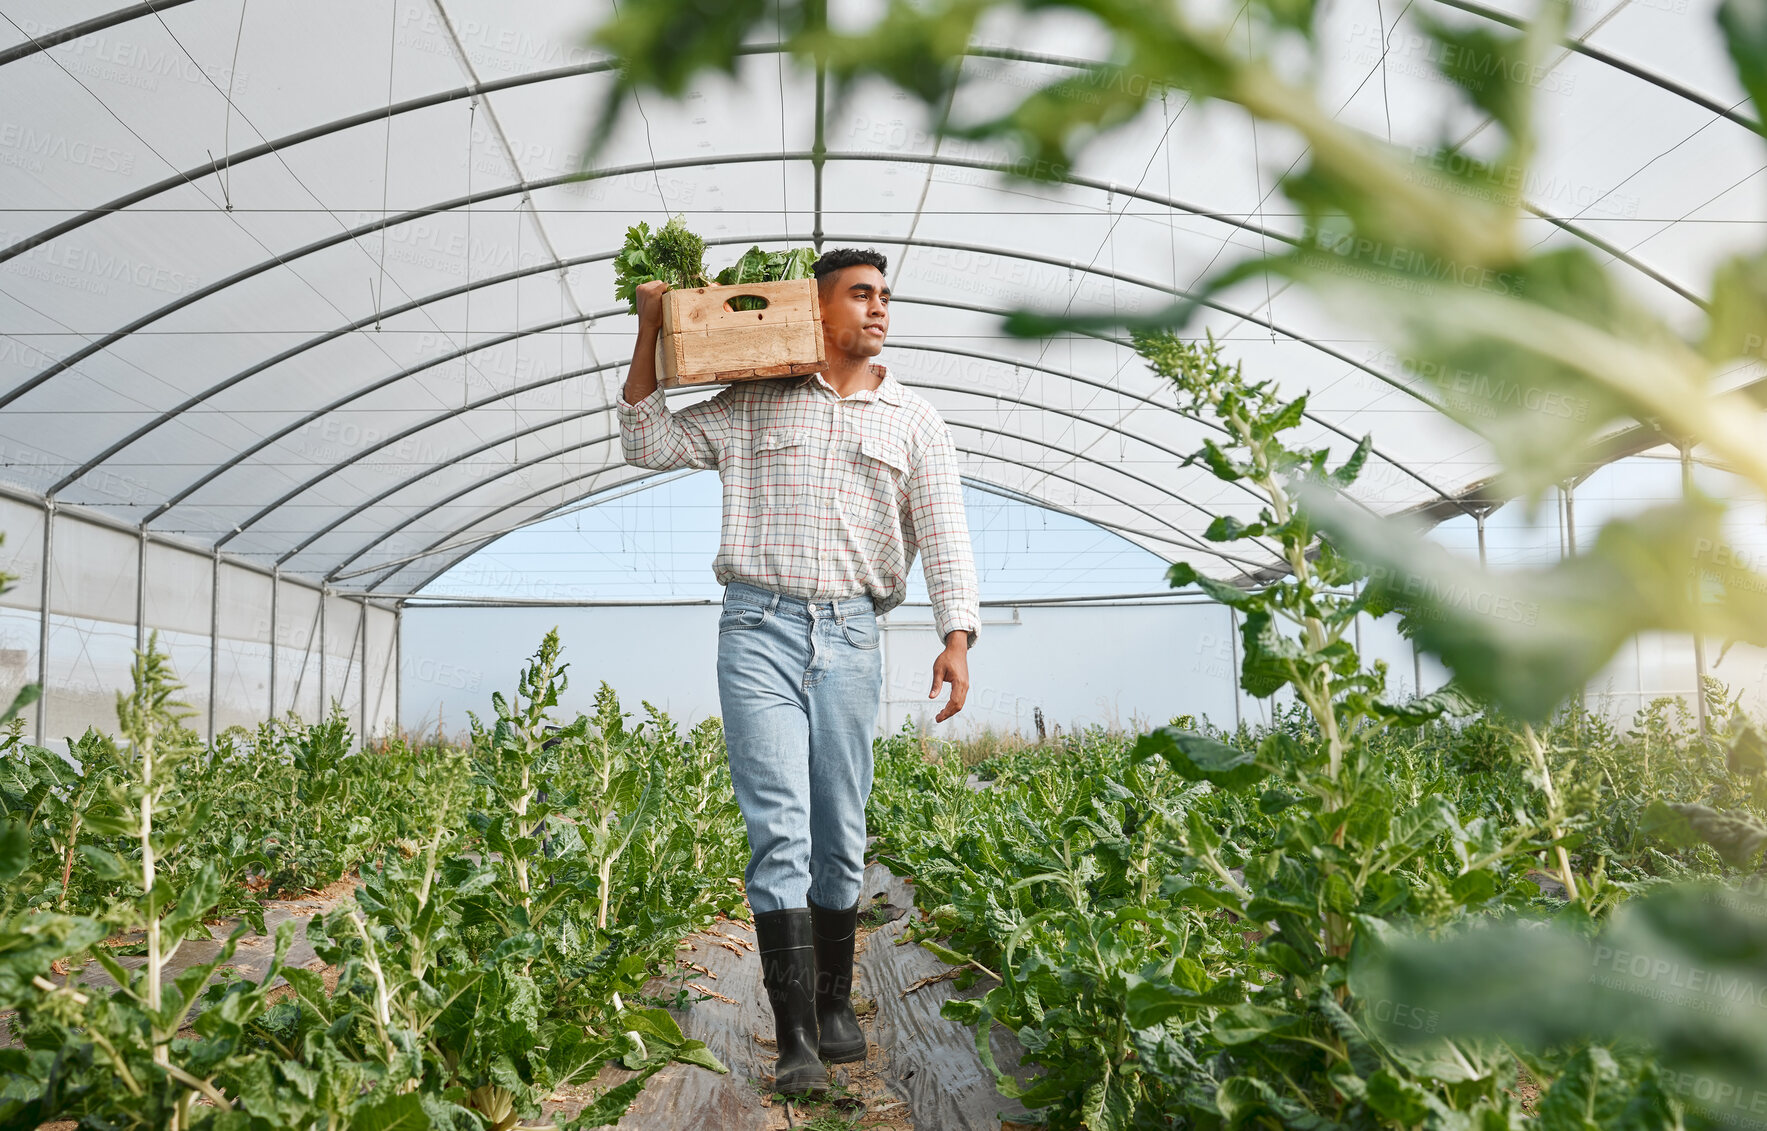 Buy stock photo Shot of a young man holding a crate of fresh produce while working in a greenhouse on a farm